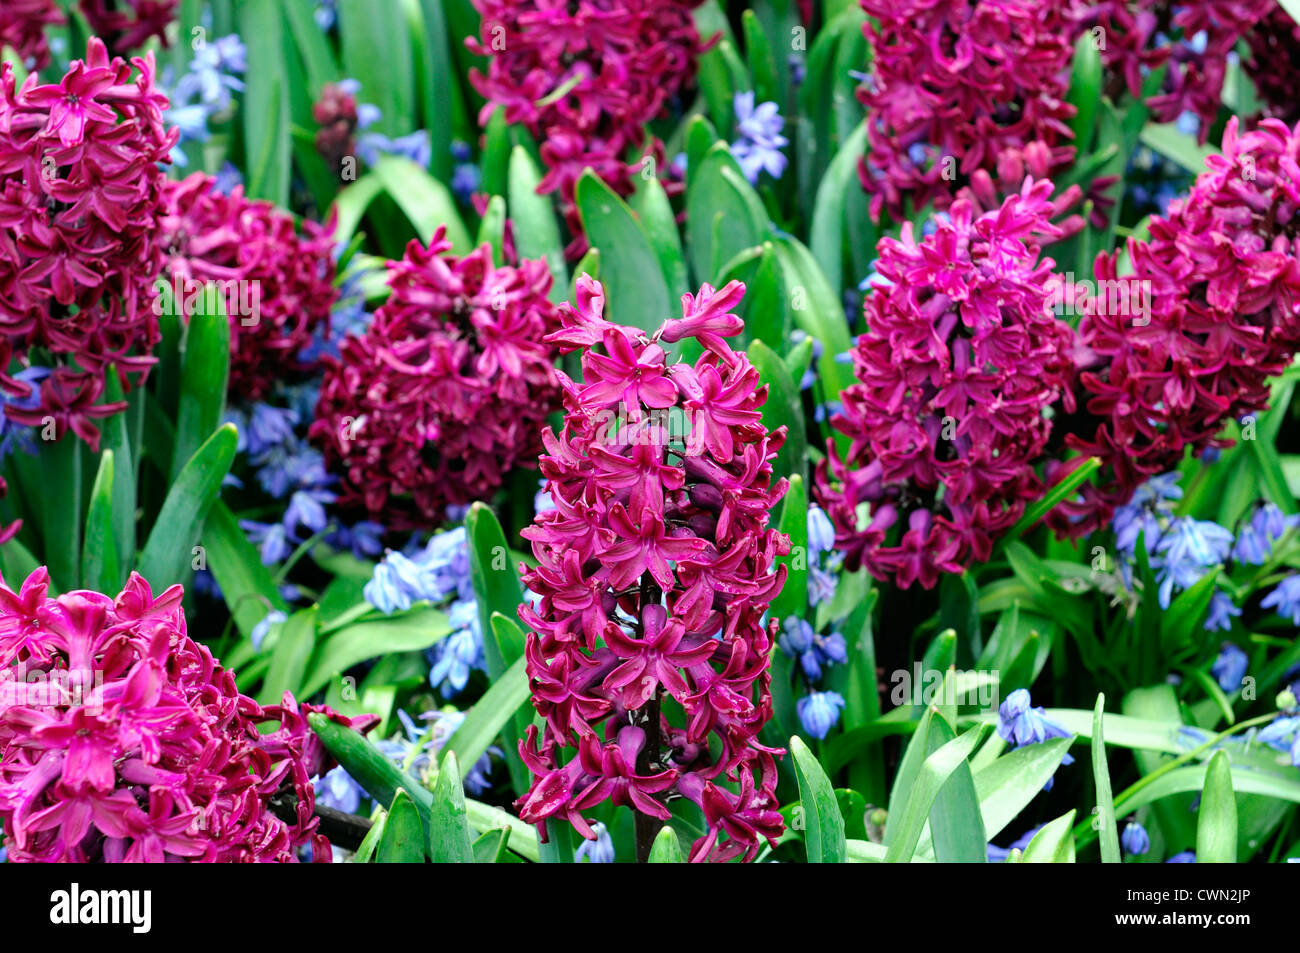 hyacinth hyacinthus orientalis woodstock scilla siberica spring flowers mix mixed bed border planting scheme combination combo Stock Photo